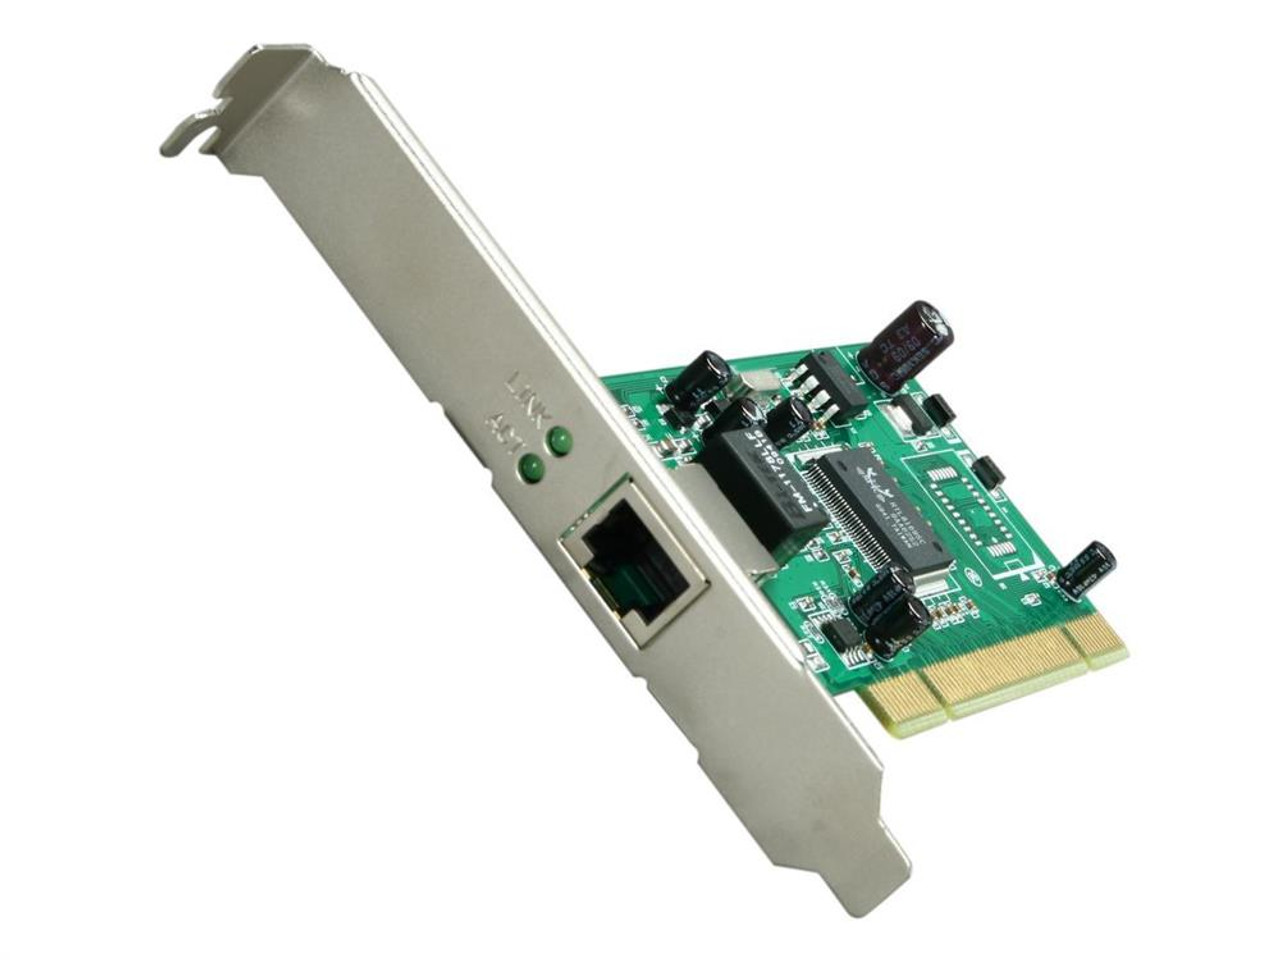 TEG-PCITXR-AOK AddOn ADD-PCI-1RJ45 10/100/1000Mbs Single Open RJ-45 Port 100m Copper PCI Network Interface Card - 100% compatible and guaranteed to